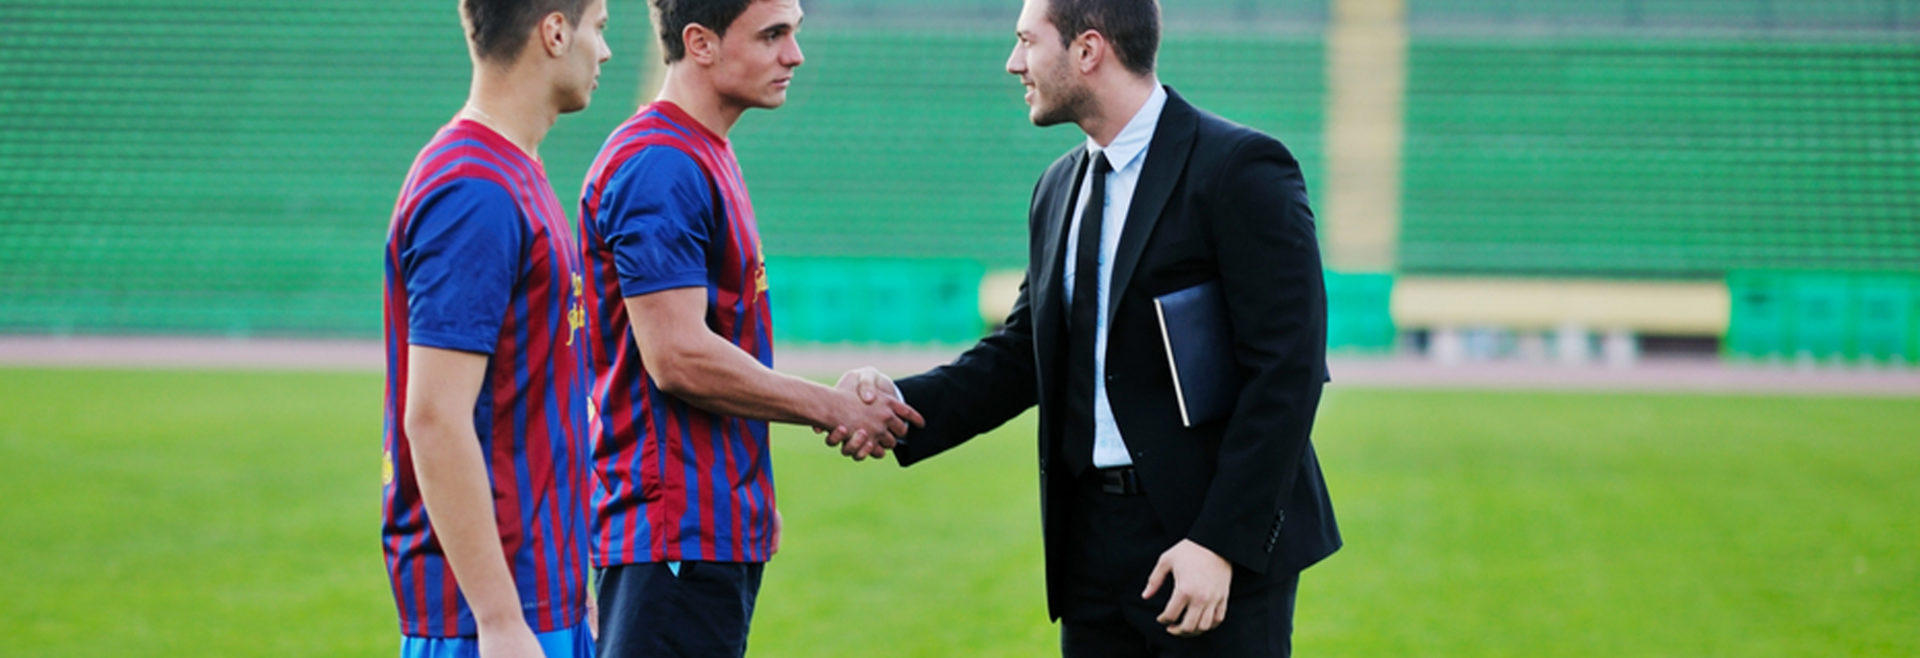 two sports players shaking a business mans hand